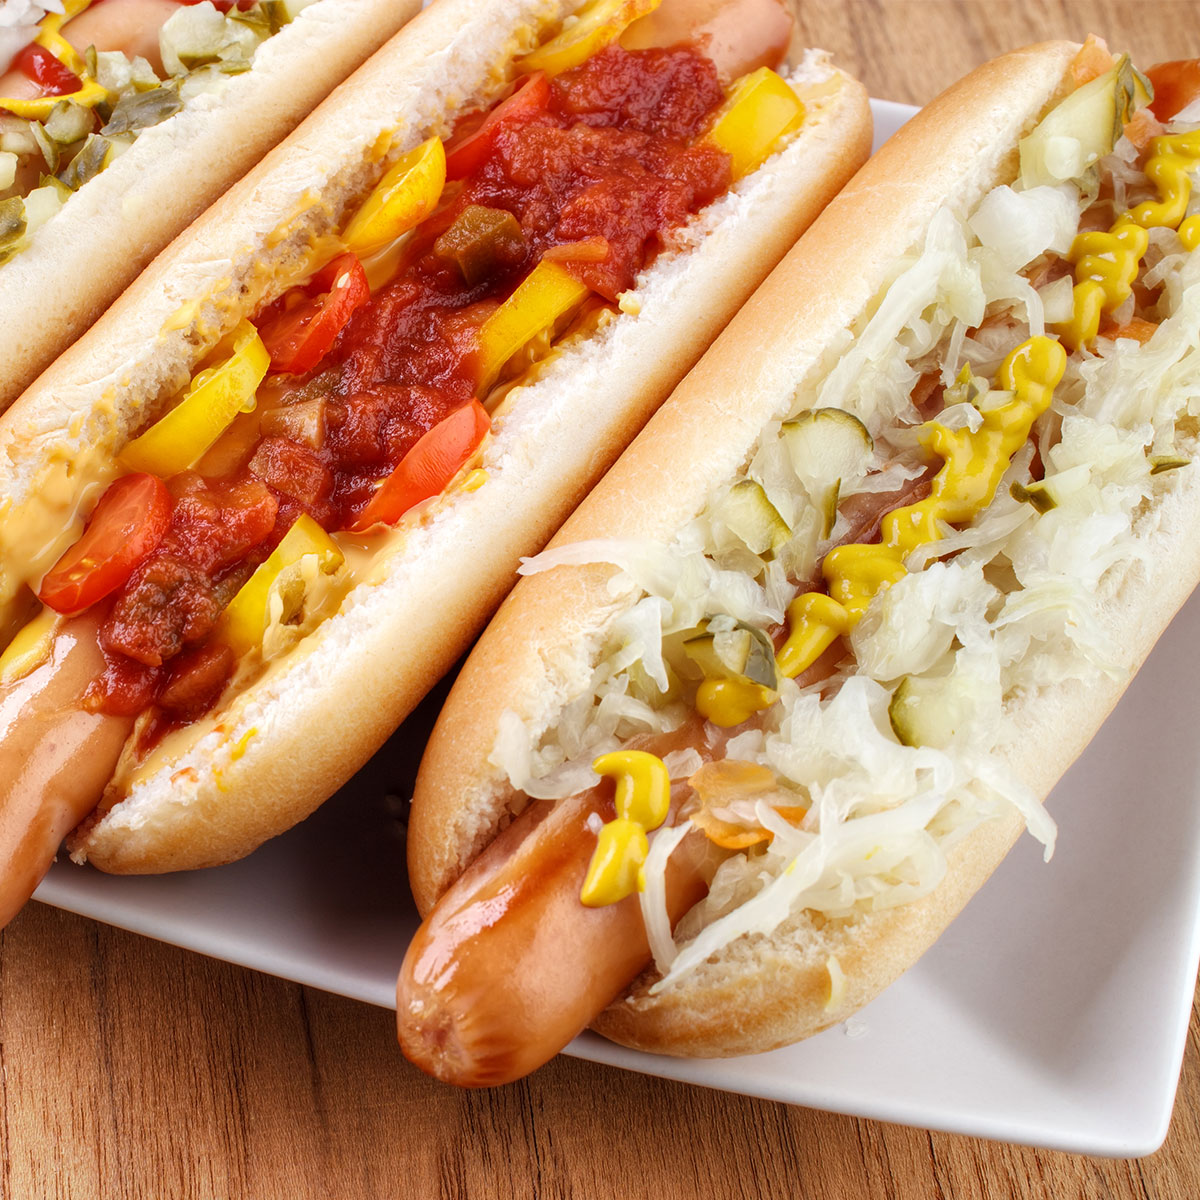 hot dogs with toppings